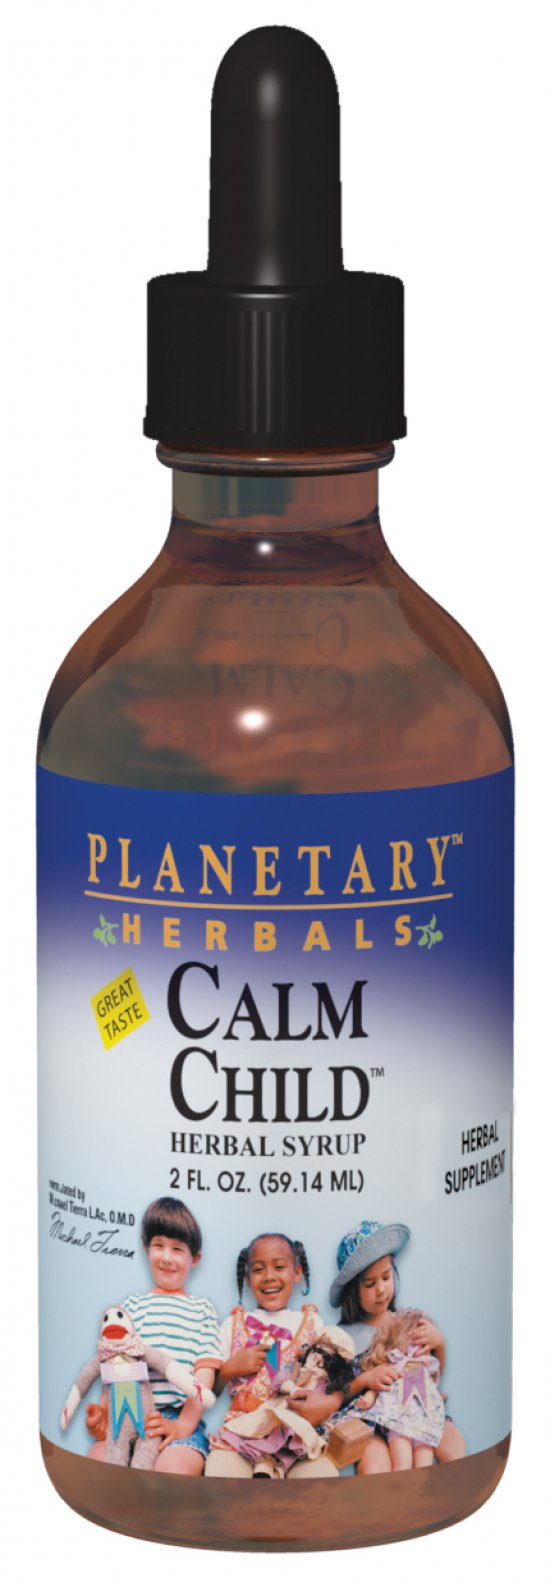 PLANETARY HERBALS: Calm Child Herbal Syrup 1 fl oz